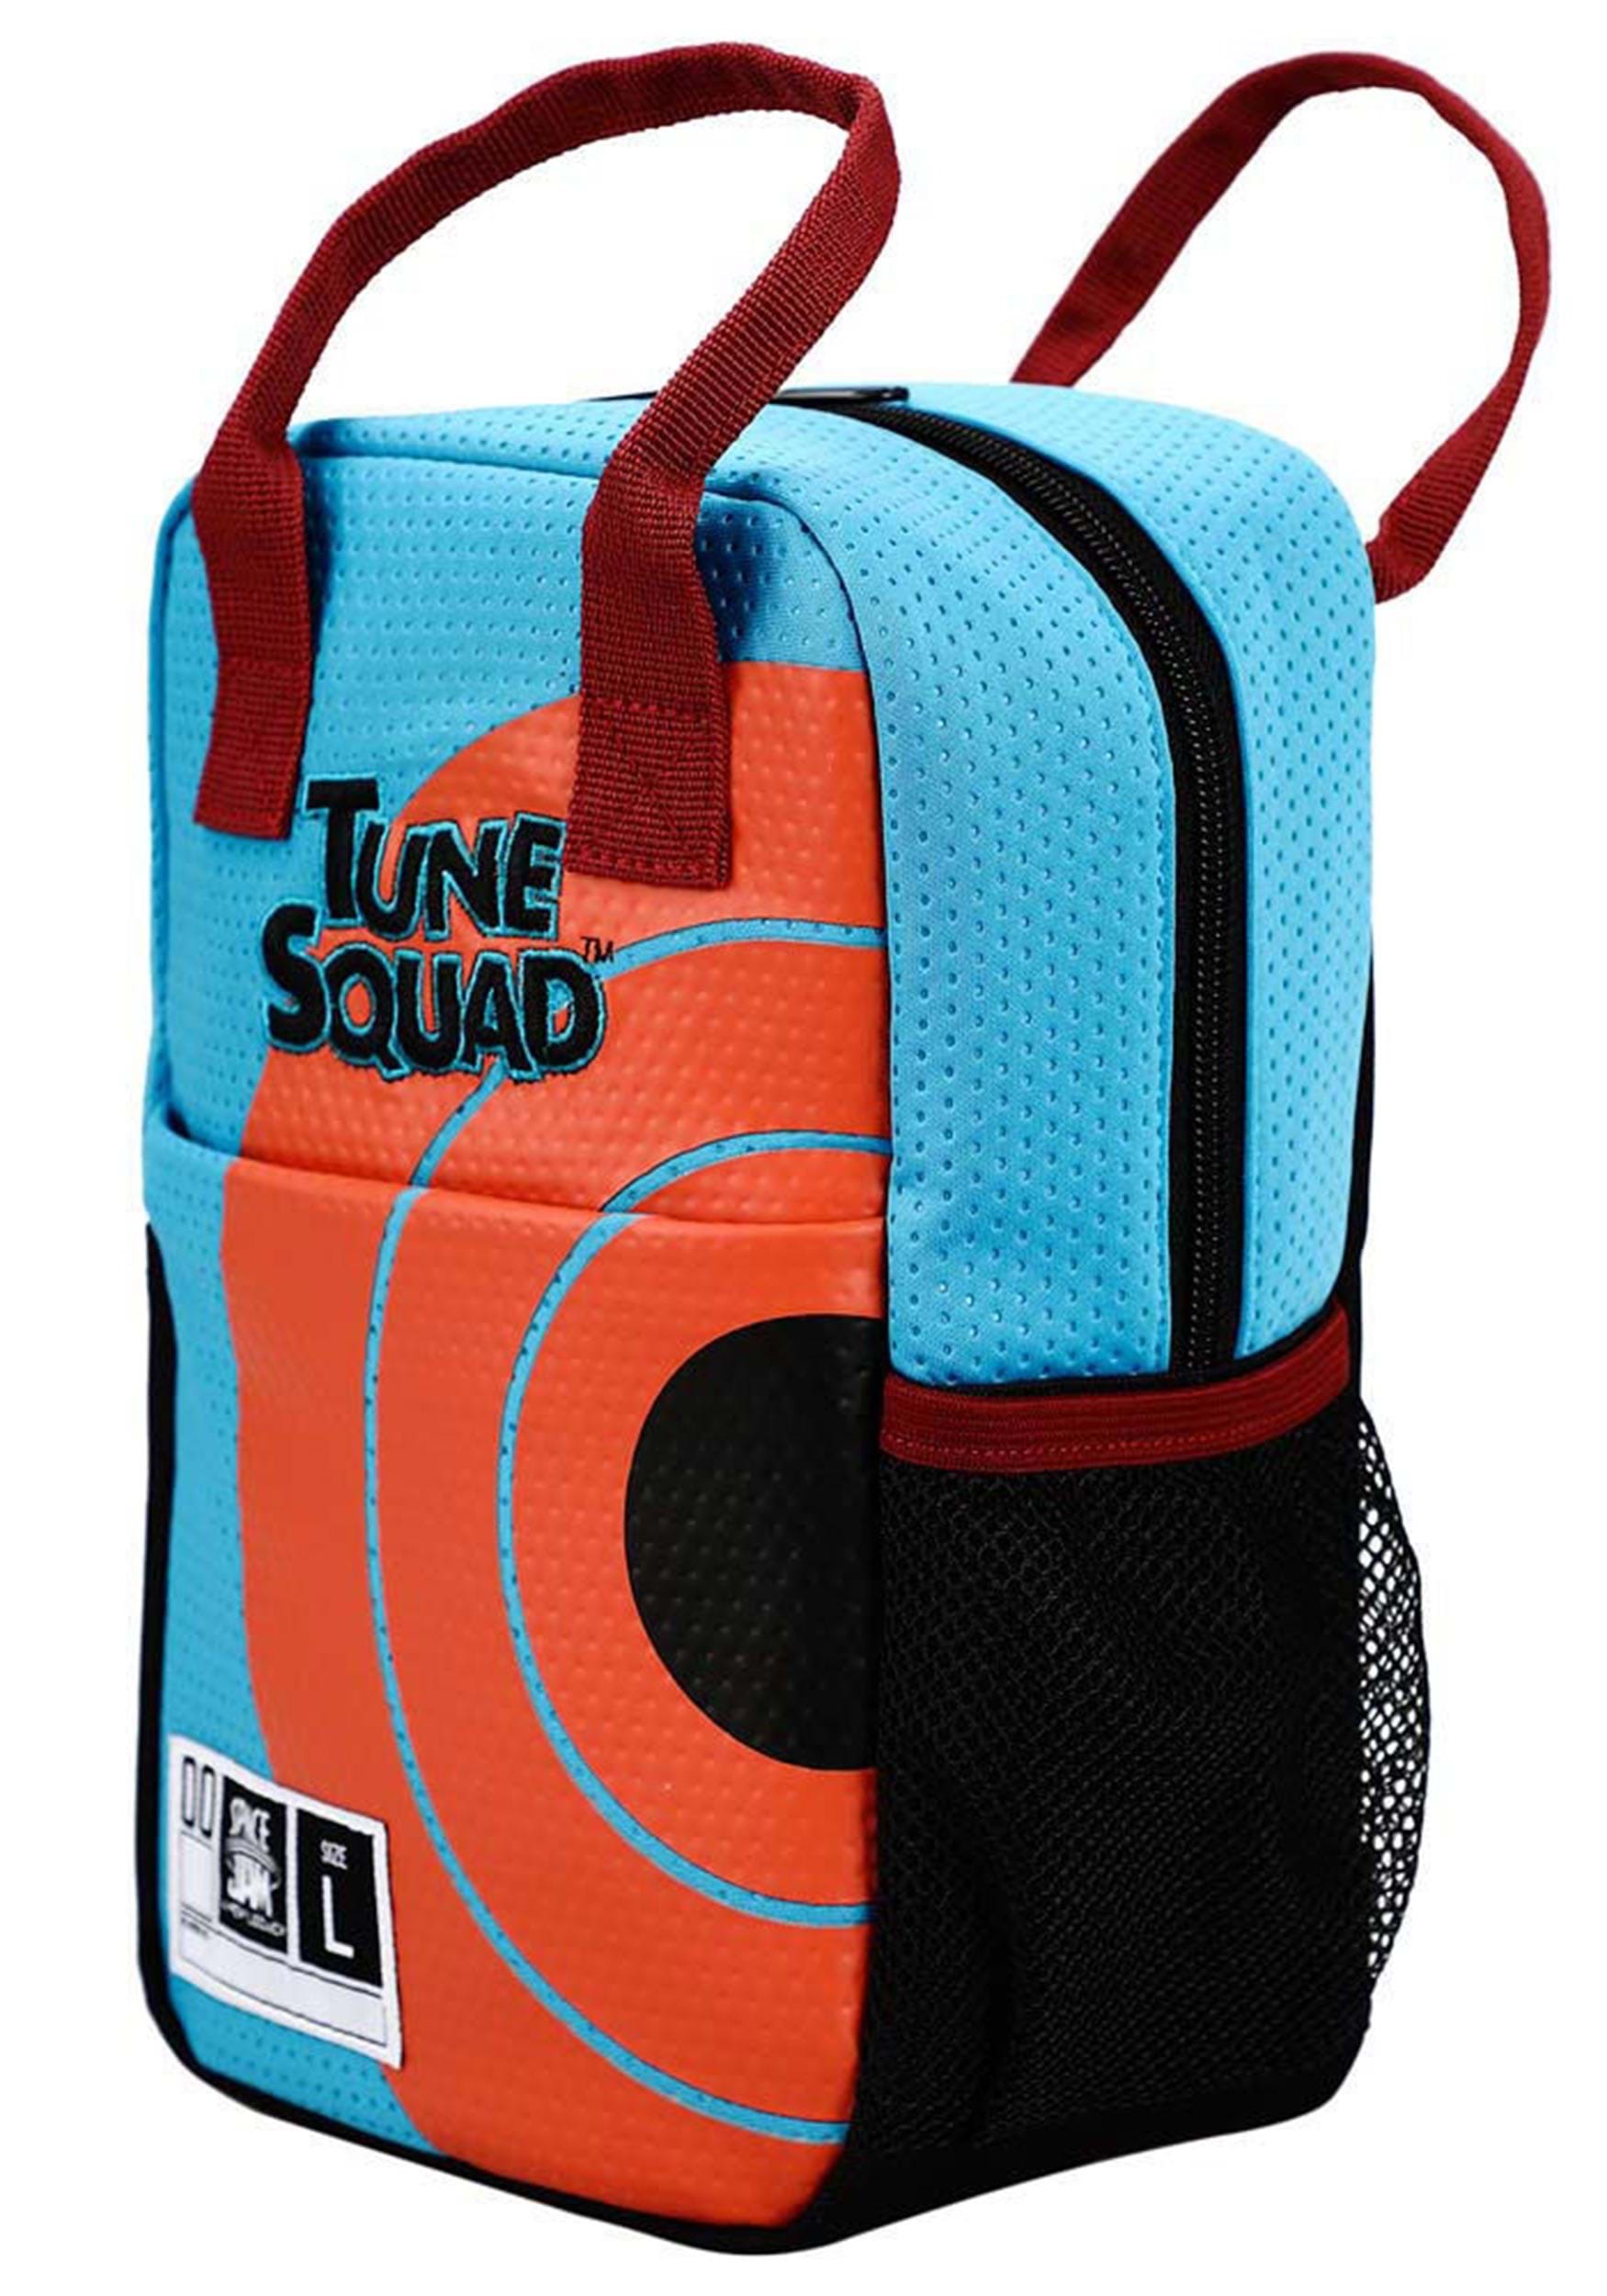 Space Jam Tune Squad Insulated Lunch Bag